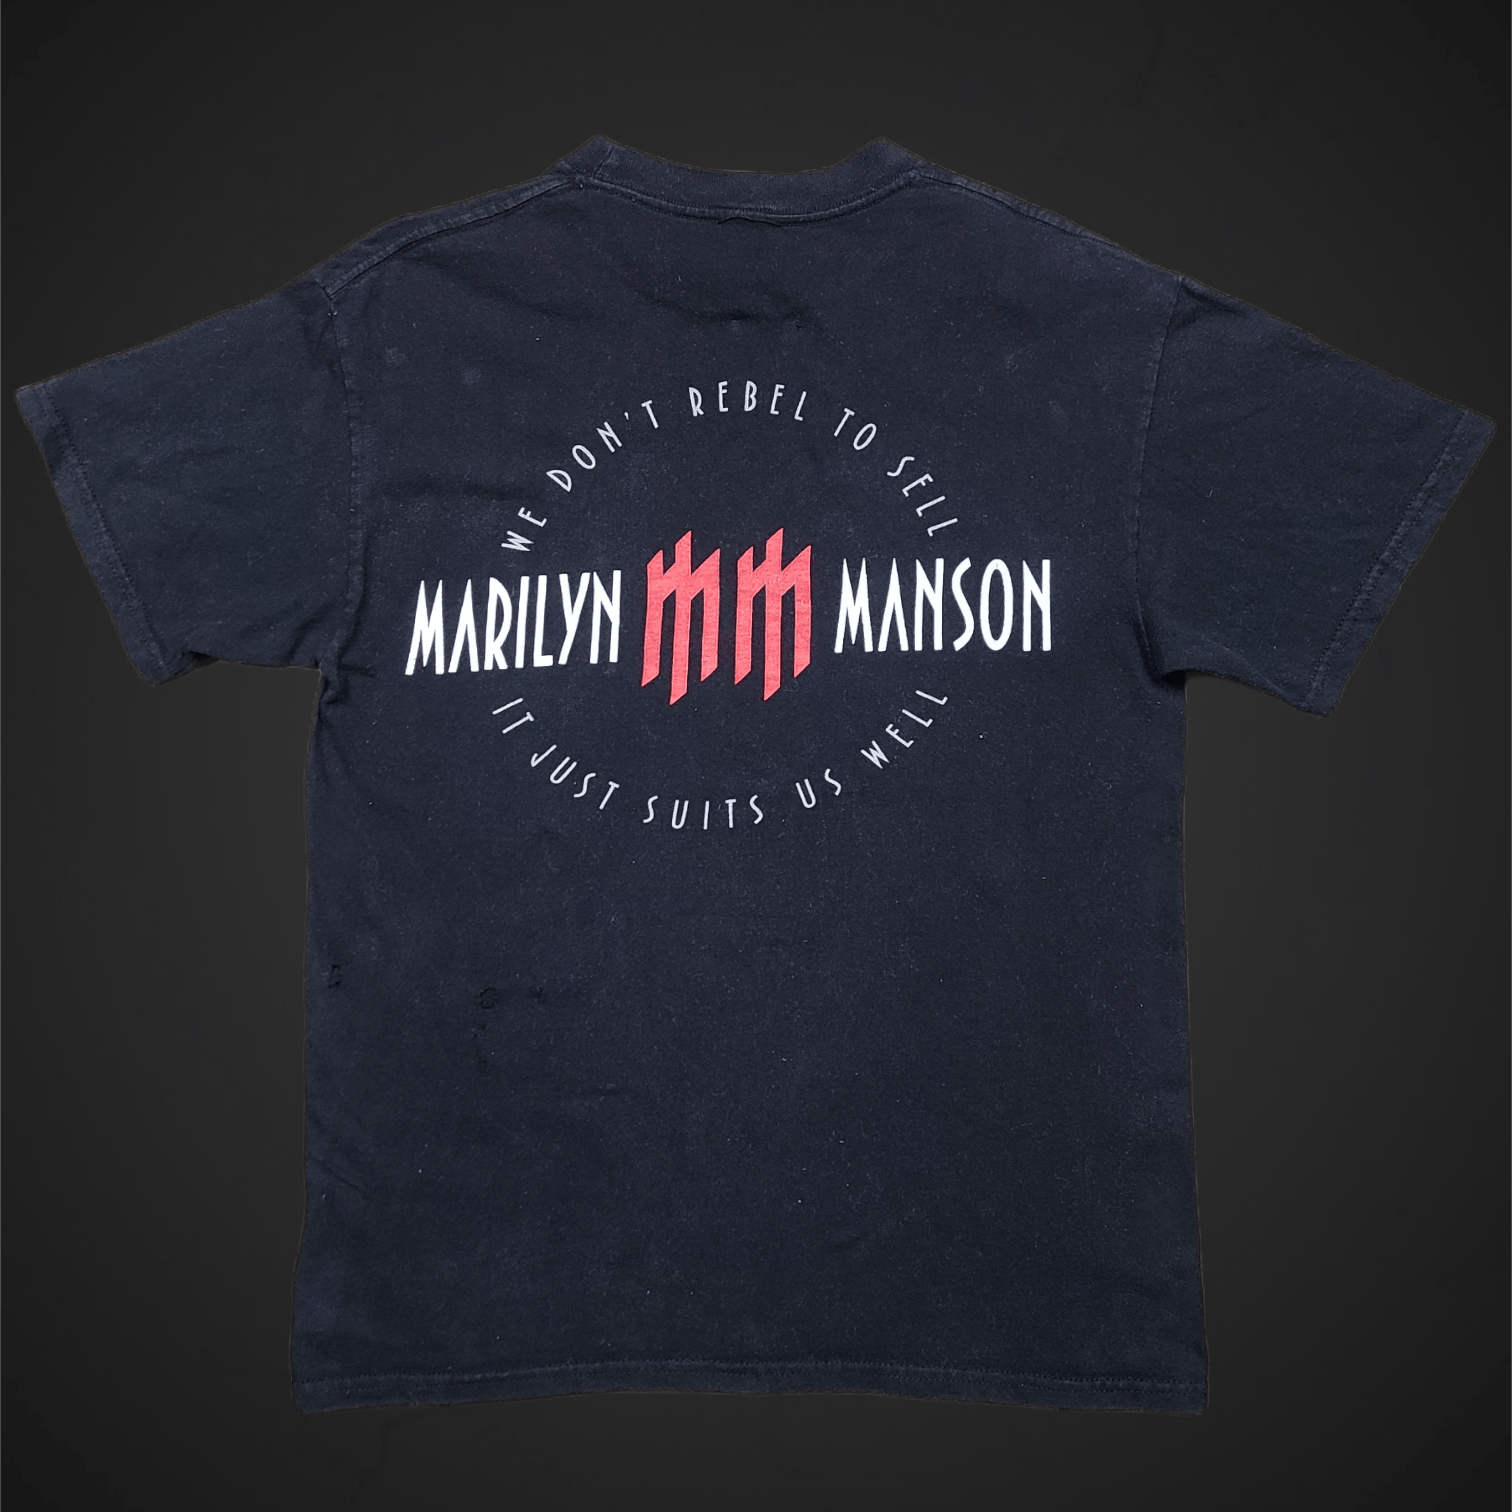 Vintage Vintage Marilyn Manson Band Tee Shirt Size US M / EU 48-50 / 2 - 2 Preview